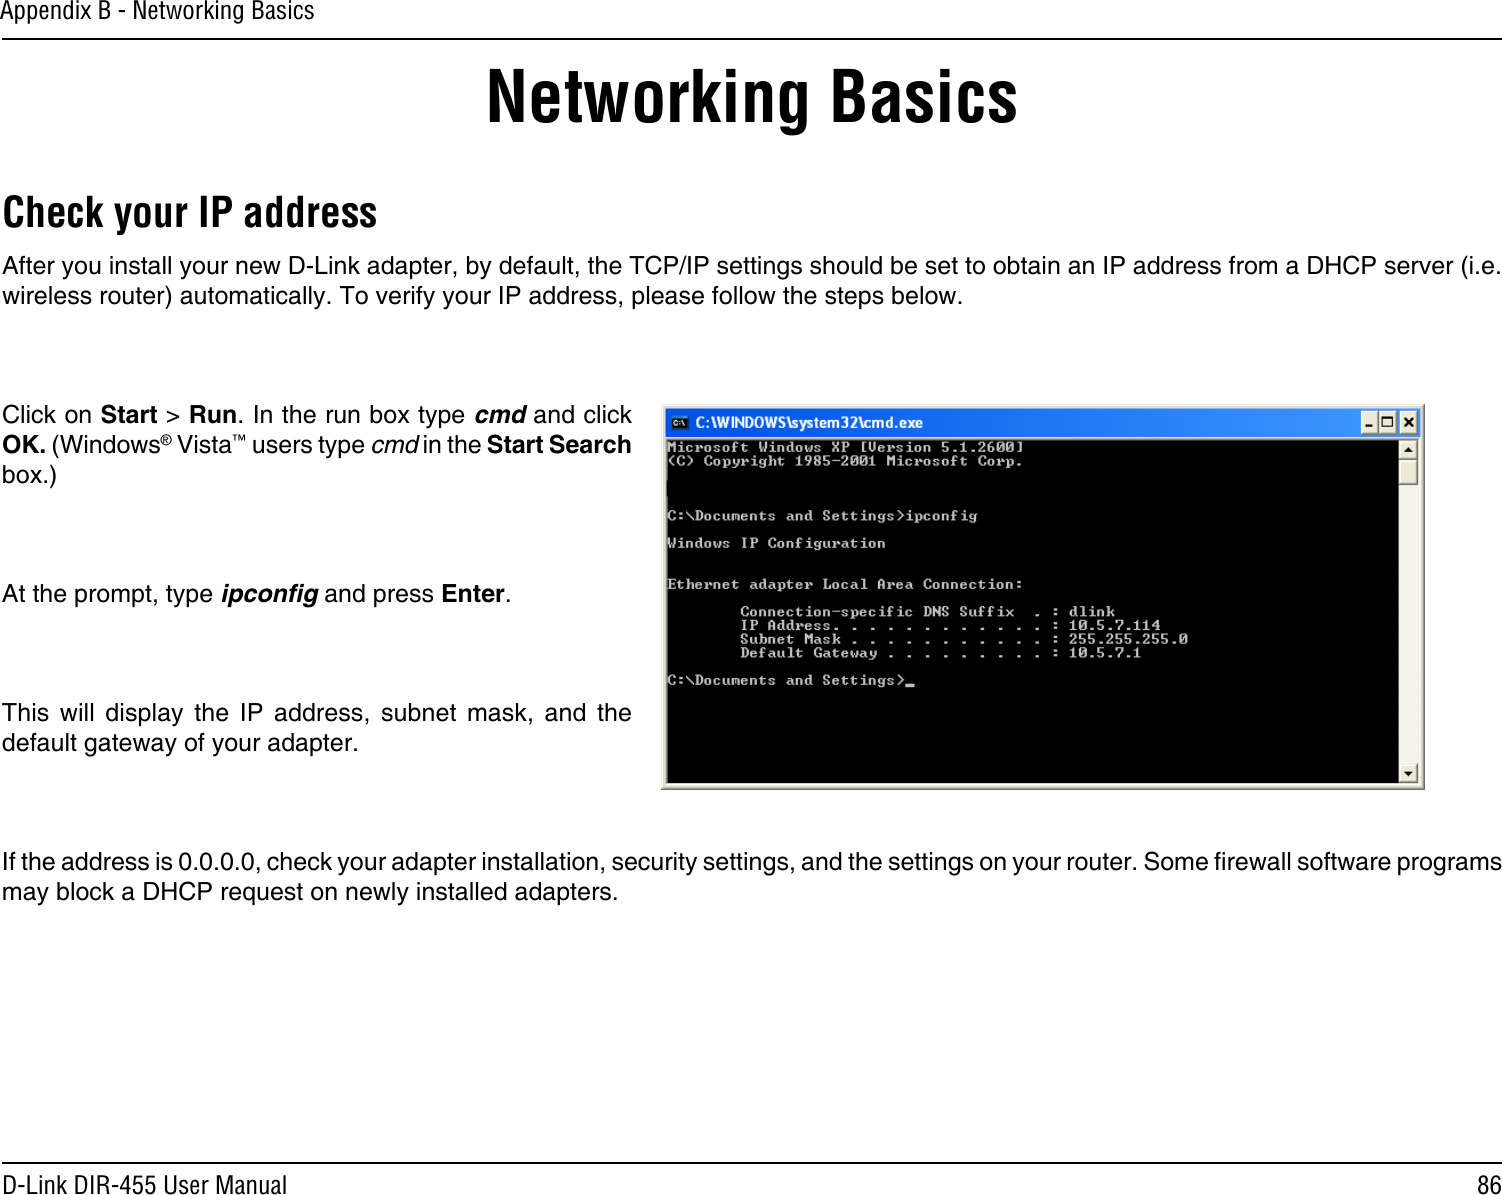 86D-Link DIR-455 User ManualAppendix B - Networking BasicsNetworking BasicsCheck your IP addressAfter you install your new D-Link adapter, by default, the TCP/IP settings should be set to obtain an IP address from a DHCP server (i.e. wireless router) automatically. To verify your IP address, please follow the steps below.Click on Start &gt; Run. In the run box type cmd and click OK. (Windows® Vista™ users type cmd in the Start Search box.)At the prompt, type ipconﬁg and press Enter.This  will  display  the  IP  address,  subnet  mask,  and  the default gateway of your adapter.If the address is 0.0.0.0, check your adapter installation, security settings, and the settings on your router. Some rewall software programs may block a DHCP request on newly installed adapters. 